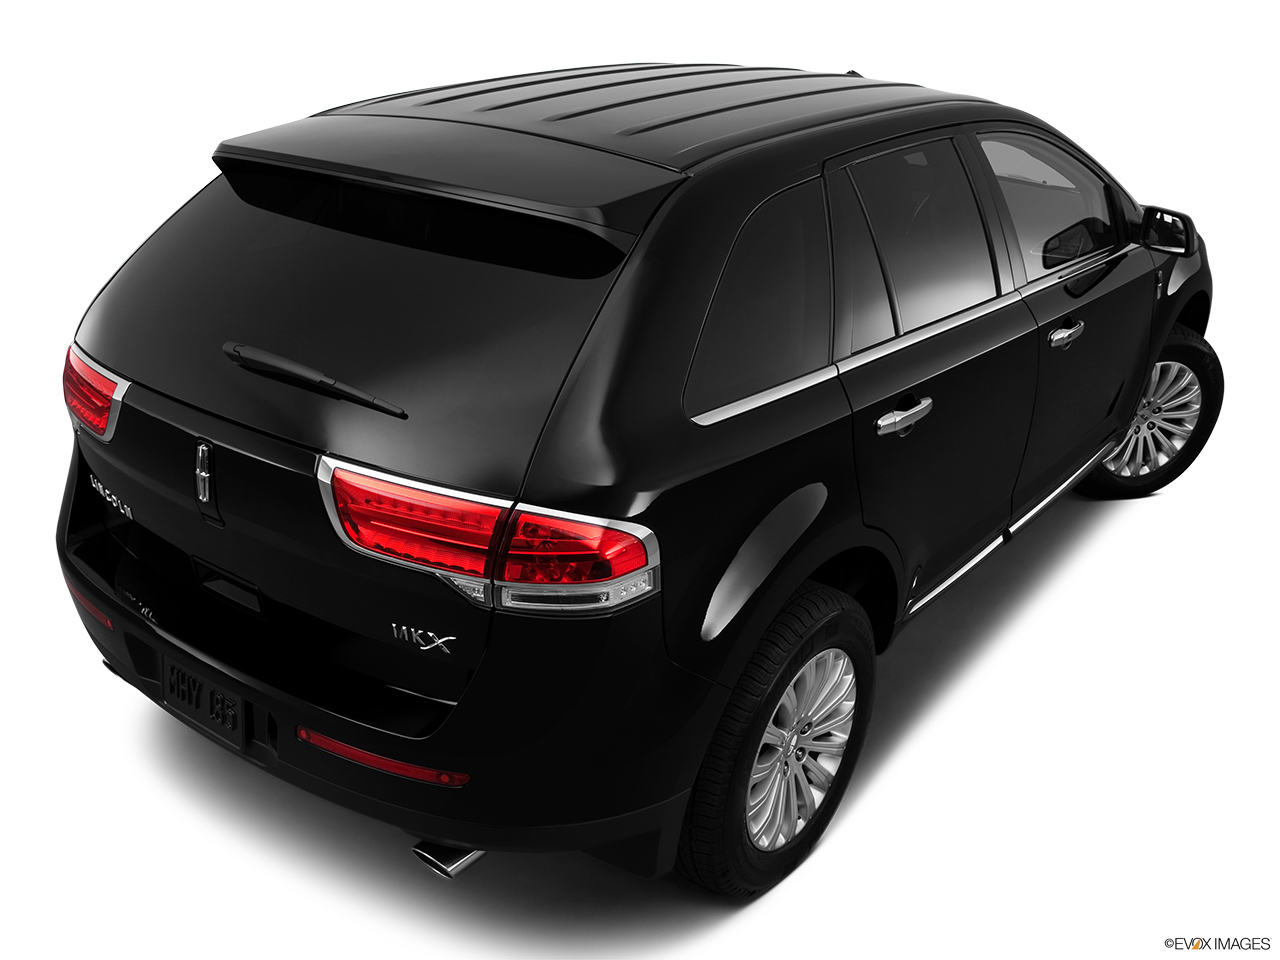 2012 Lincoln MKX FWD Rear 3/4 angle view. 